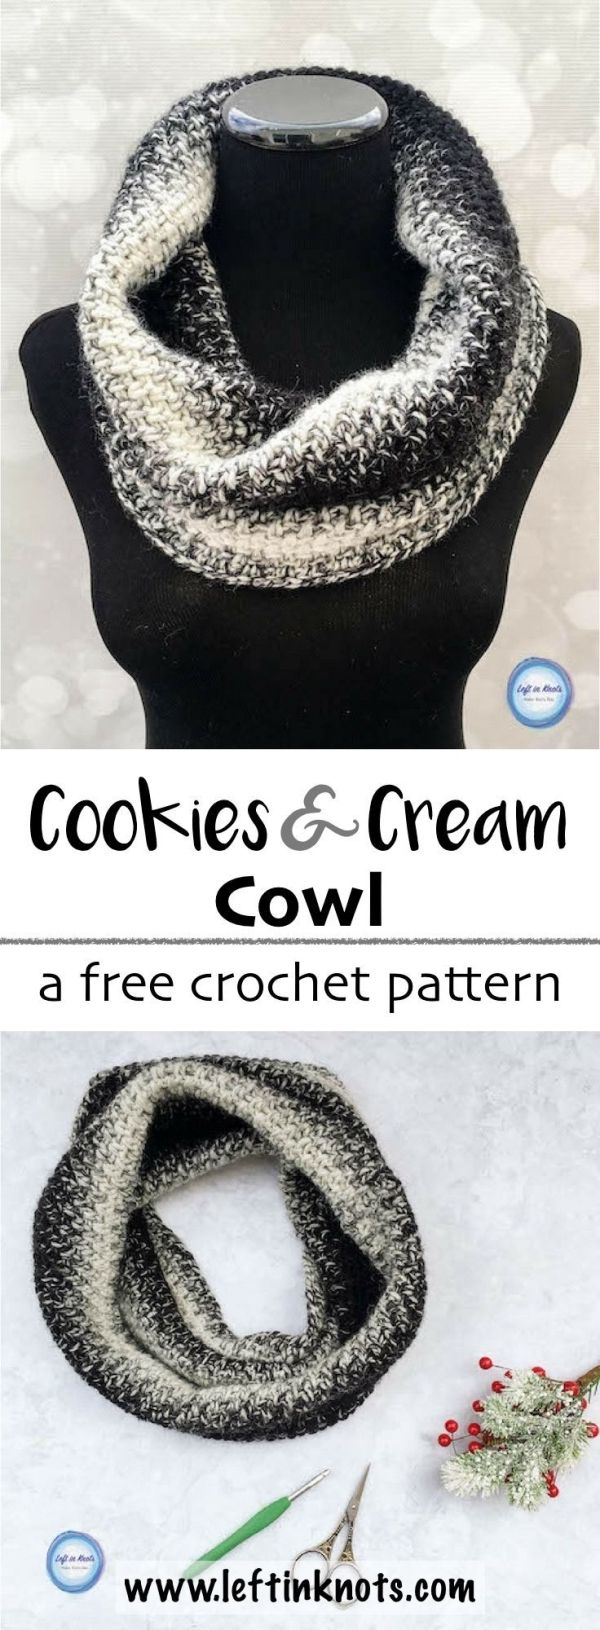 Crochet-Cookies-and-Cream-Cowl-A-Free-One-Skein-Pattern.jpg